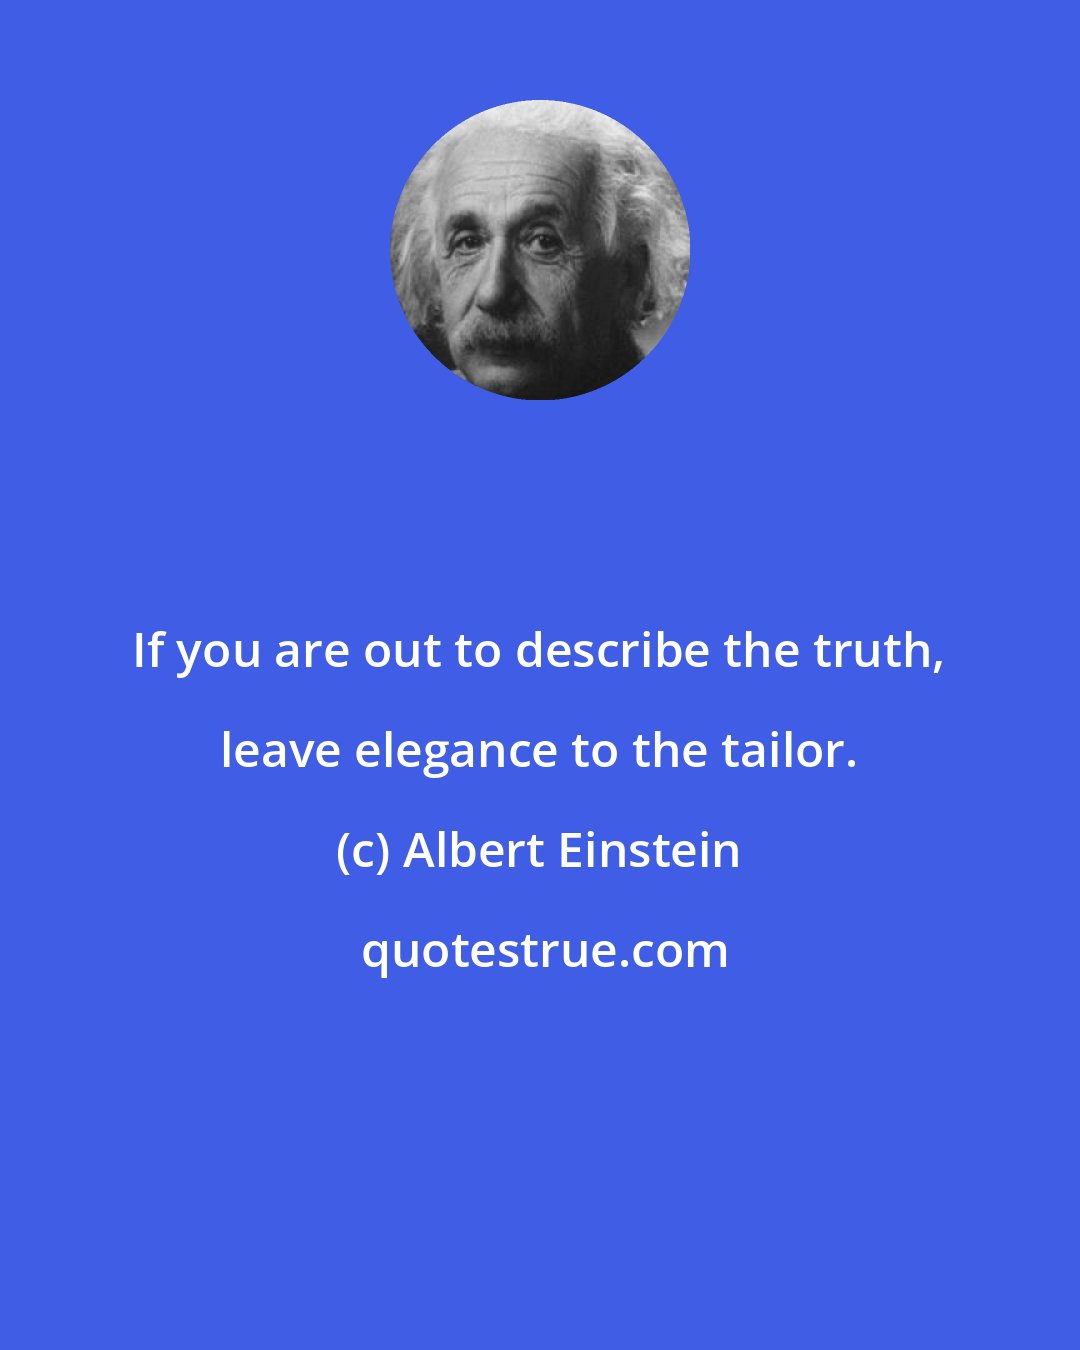 Albert Einstein: If you are out to describe the truth, leave elegance to the tailor.